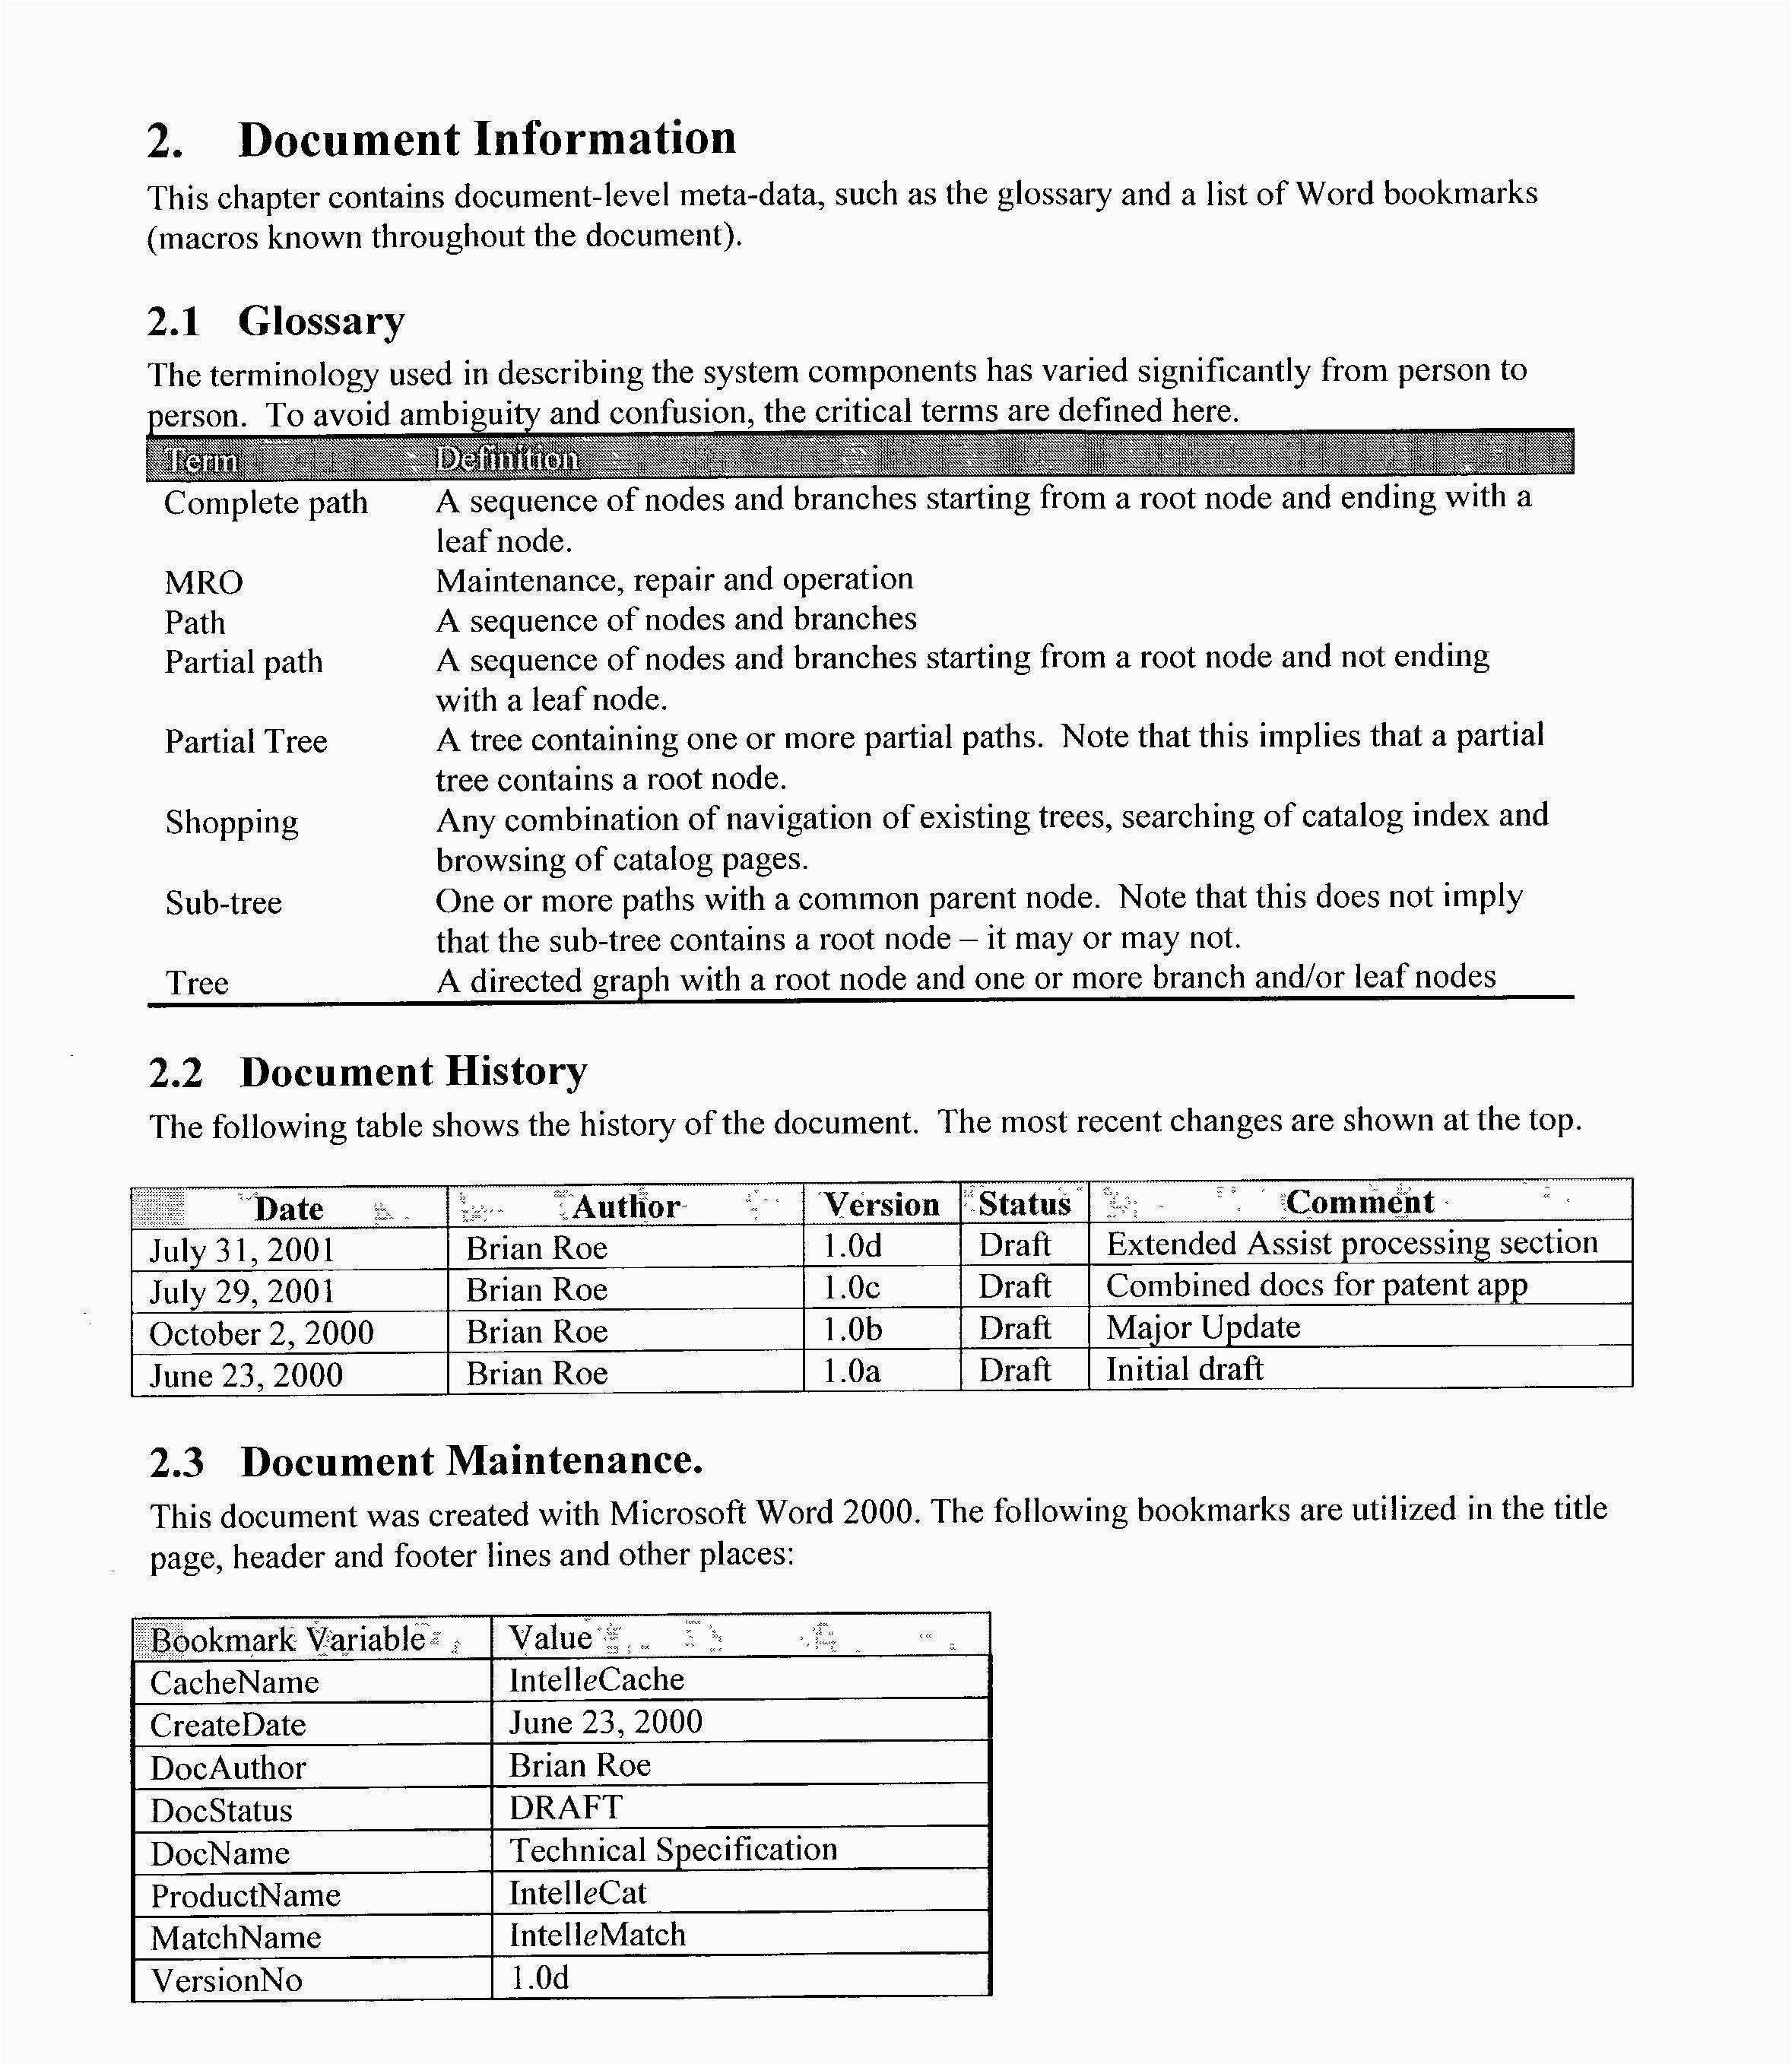 Free Printable Easy Crossword Puzzles Archives - Caucanegocios.co - Free Printable Business Documents